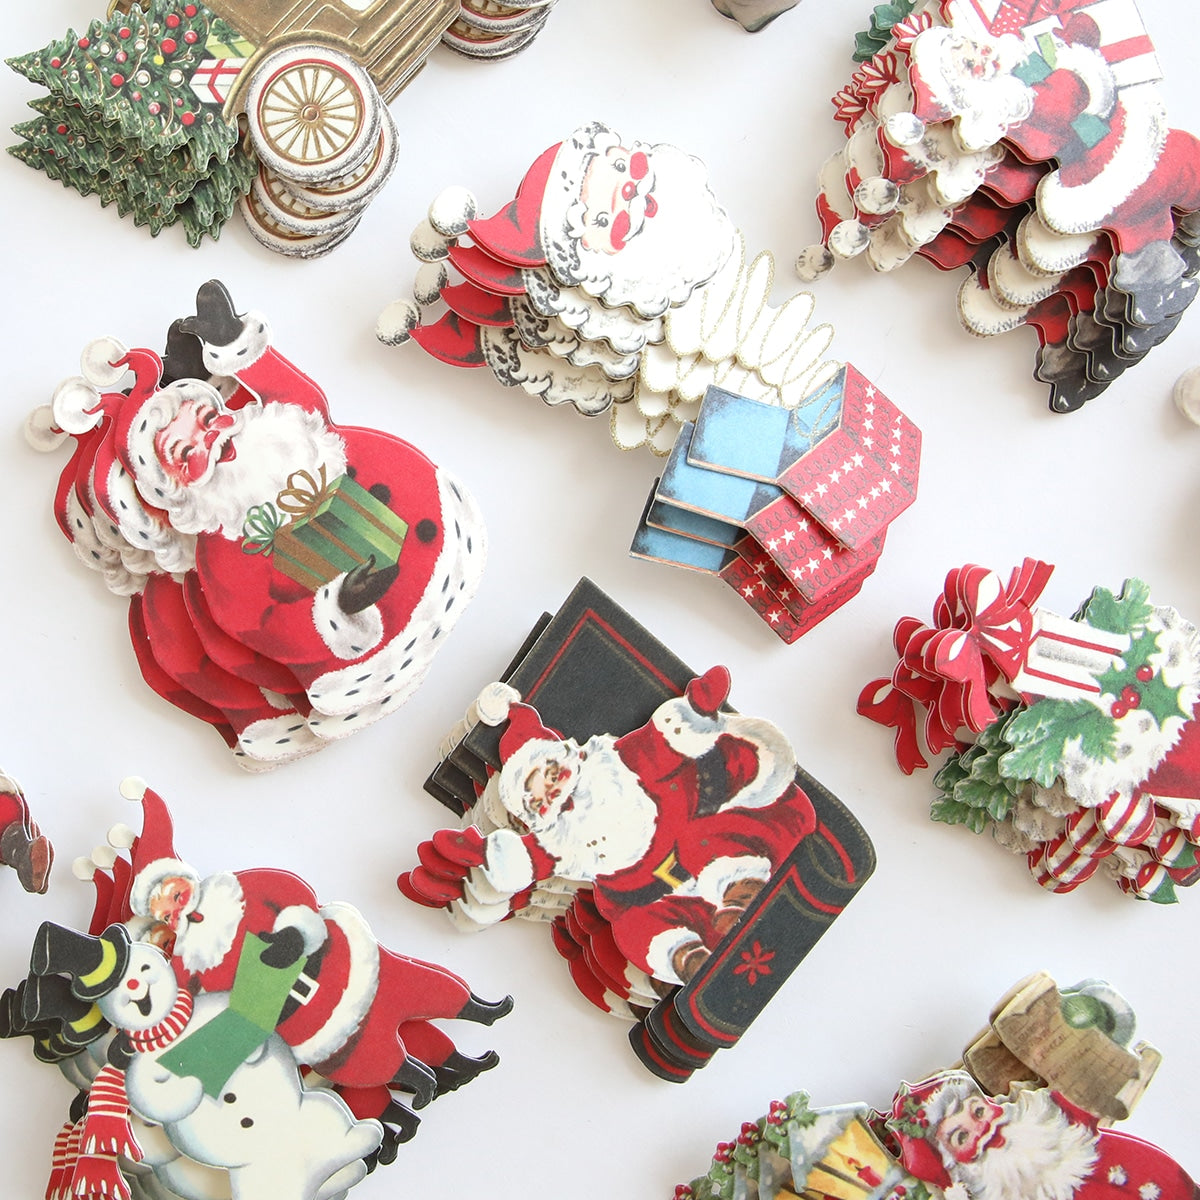 A collection of Retro Santa Sticker Bundle decorations on a white surface.